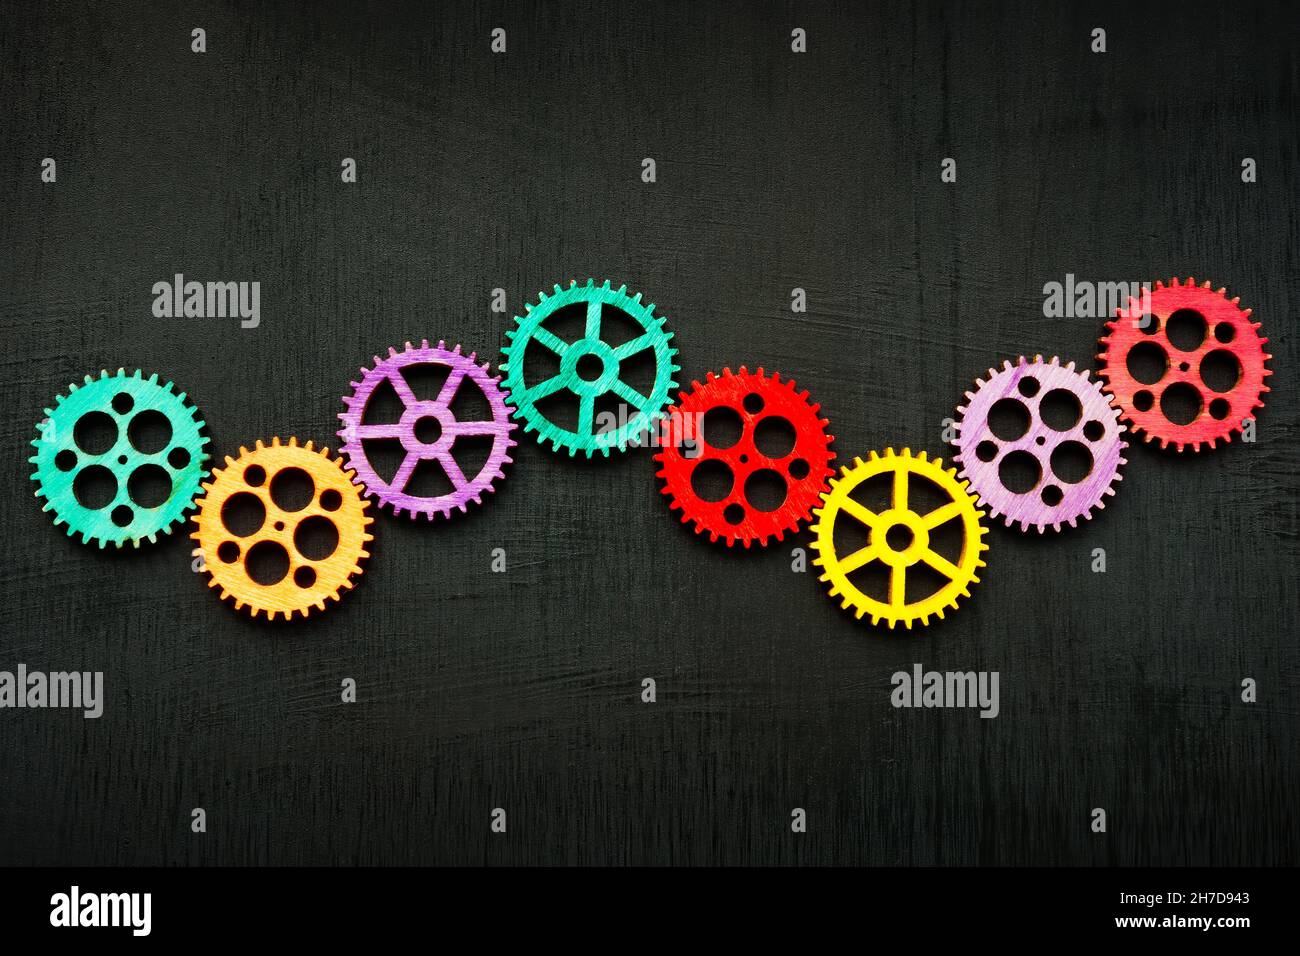 Line of colored gear wheels as symbol of teamwork and creativity. Stock Photo